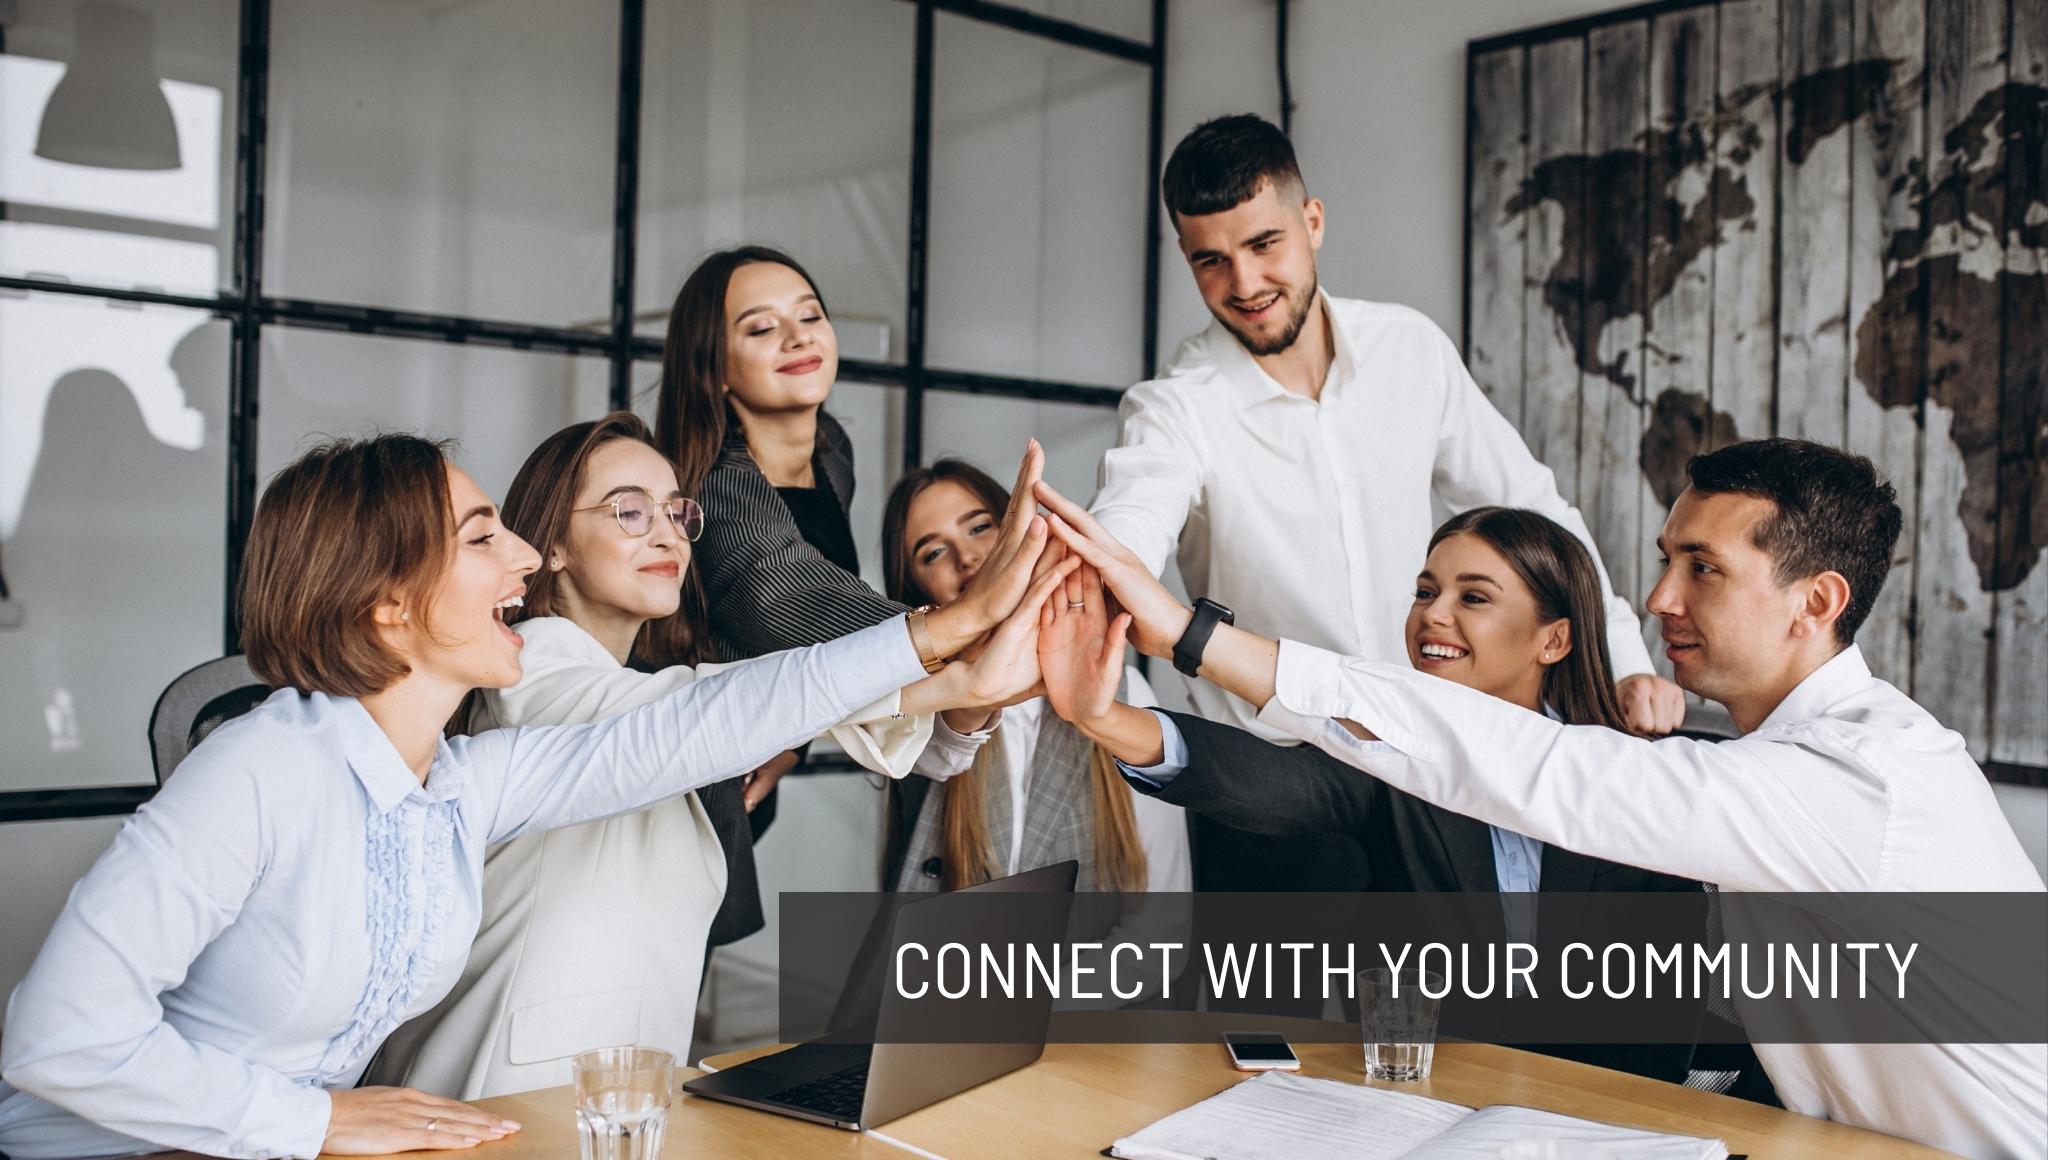 Connect with Your Community